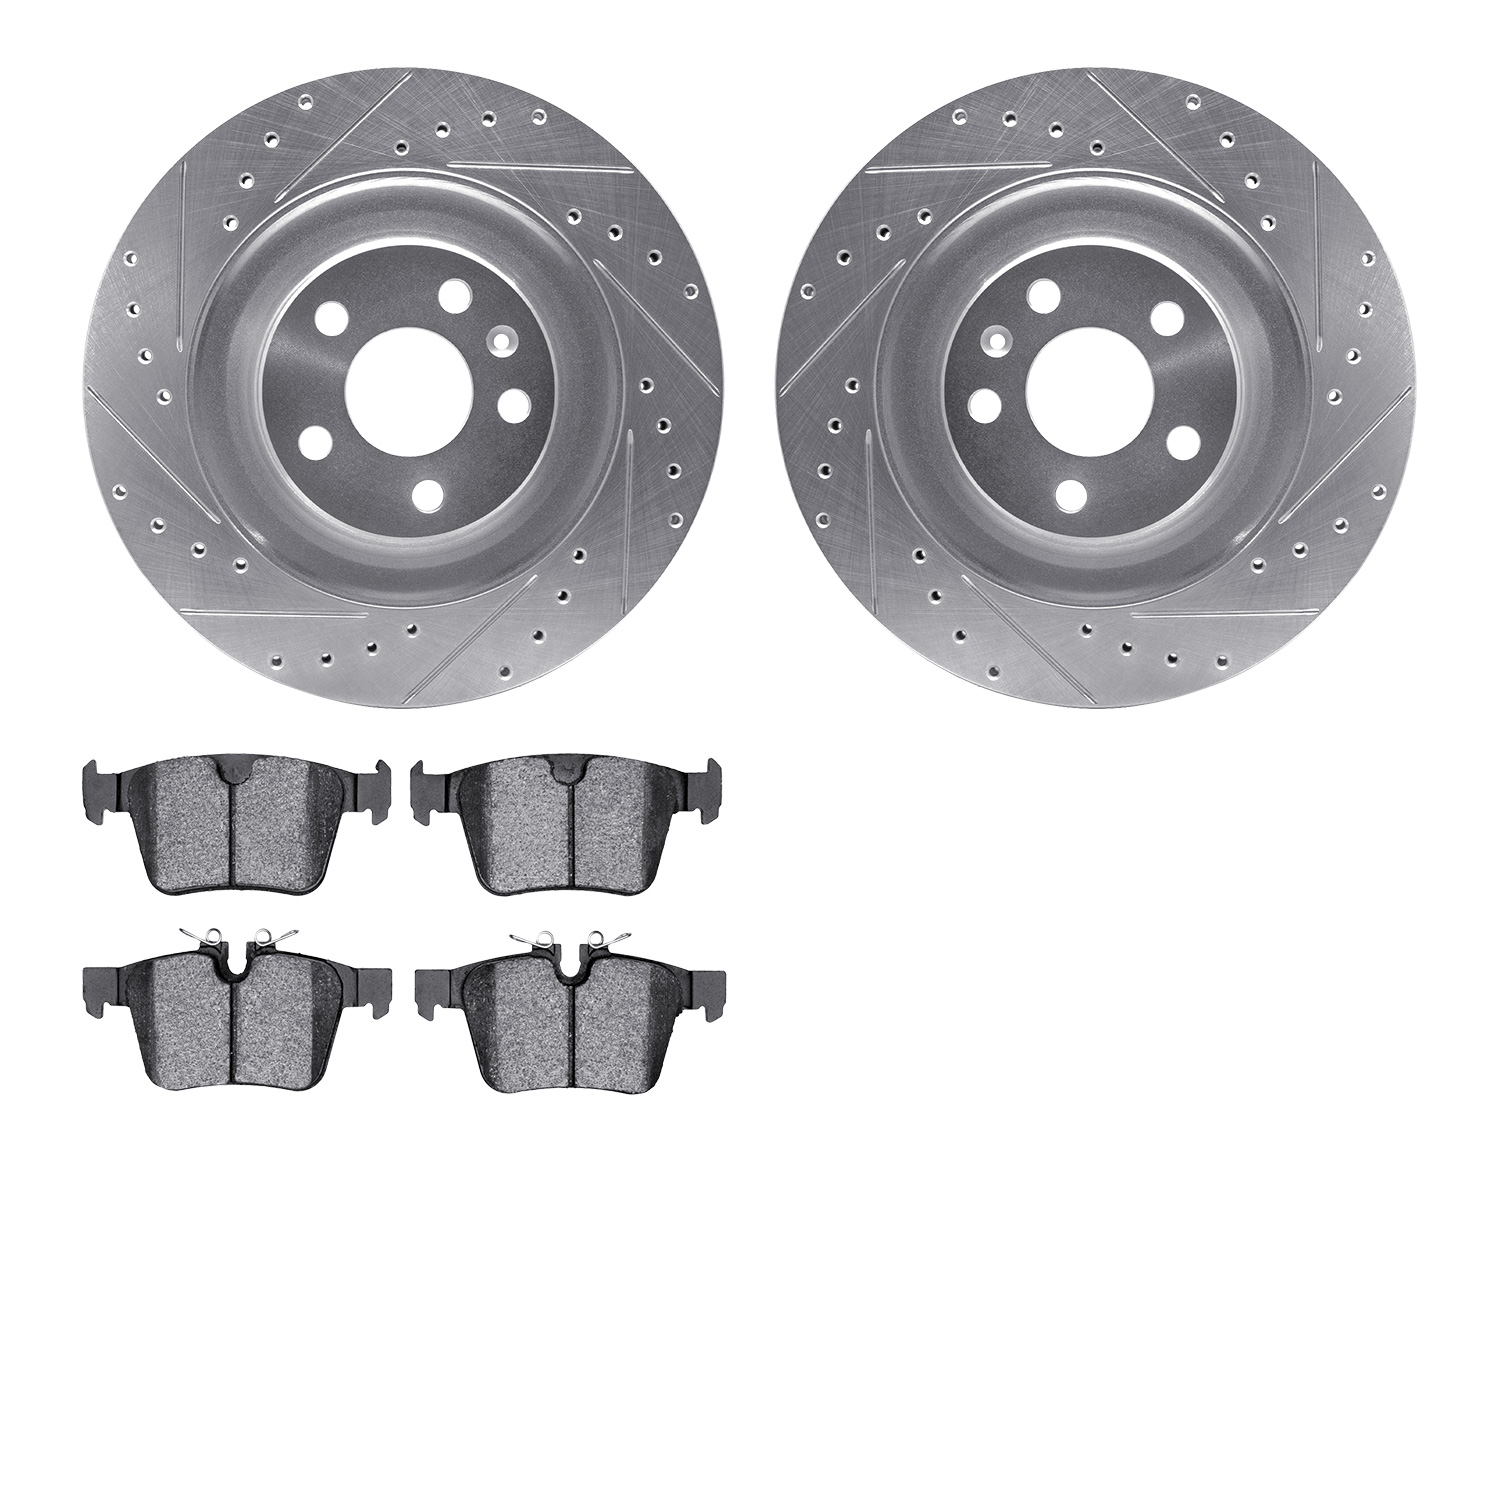 7302-27073 Drilled/Slotted Brake Rotor with 3000-Series Ceramic Brake Pads Kit [Silver], Fits Select Multiple Makes/Models, Posi